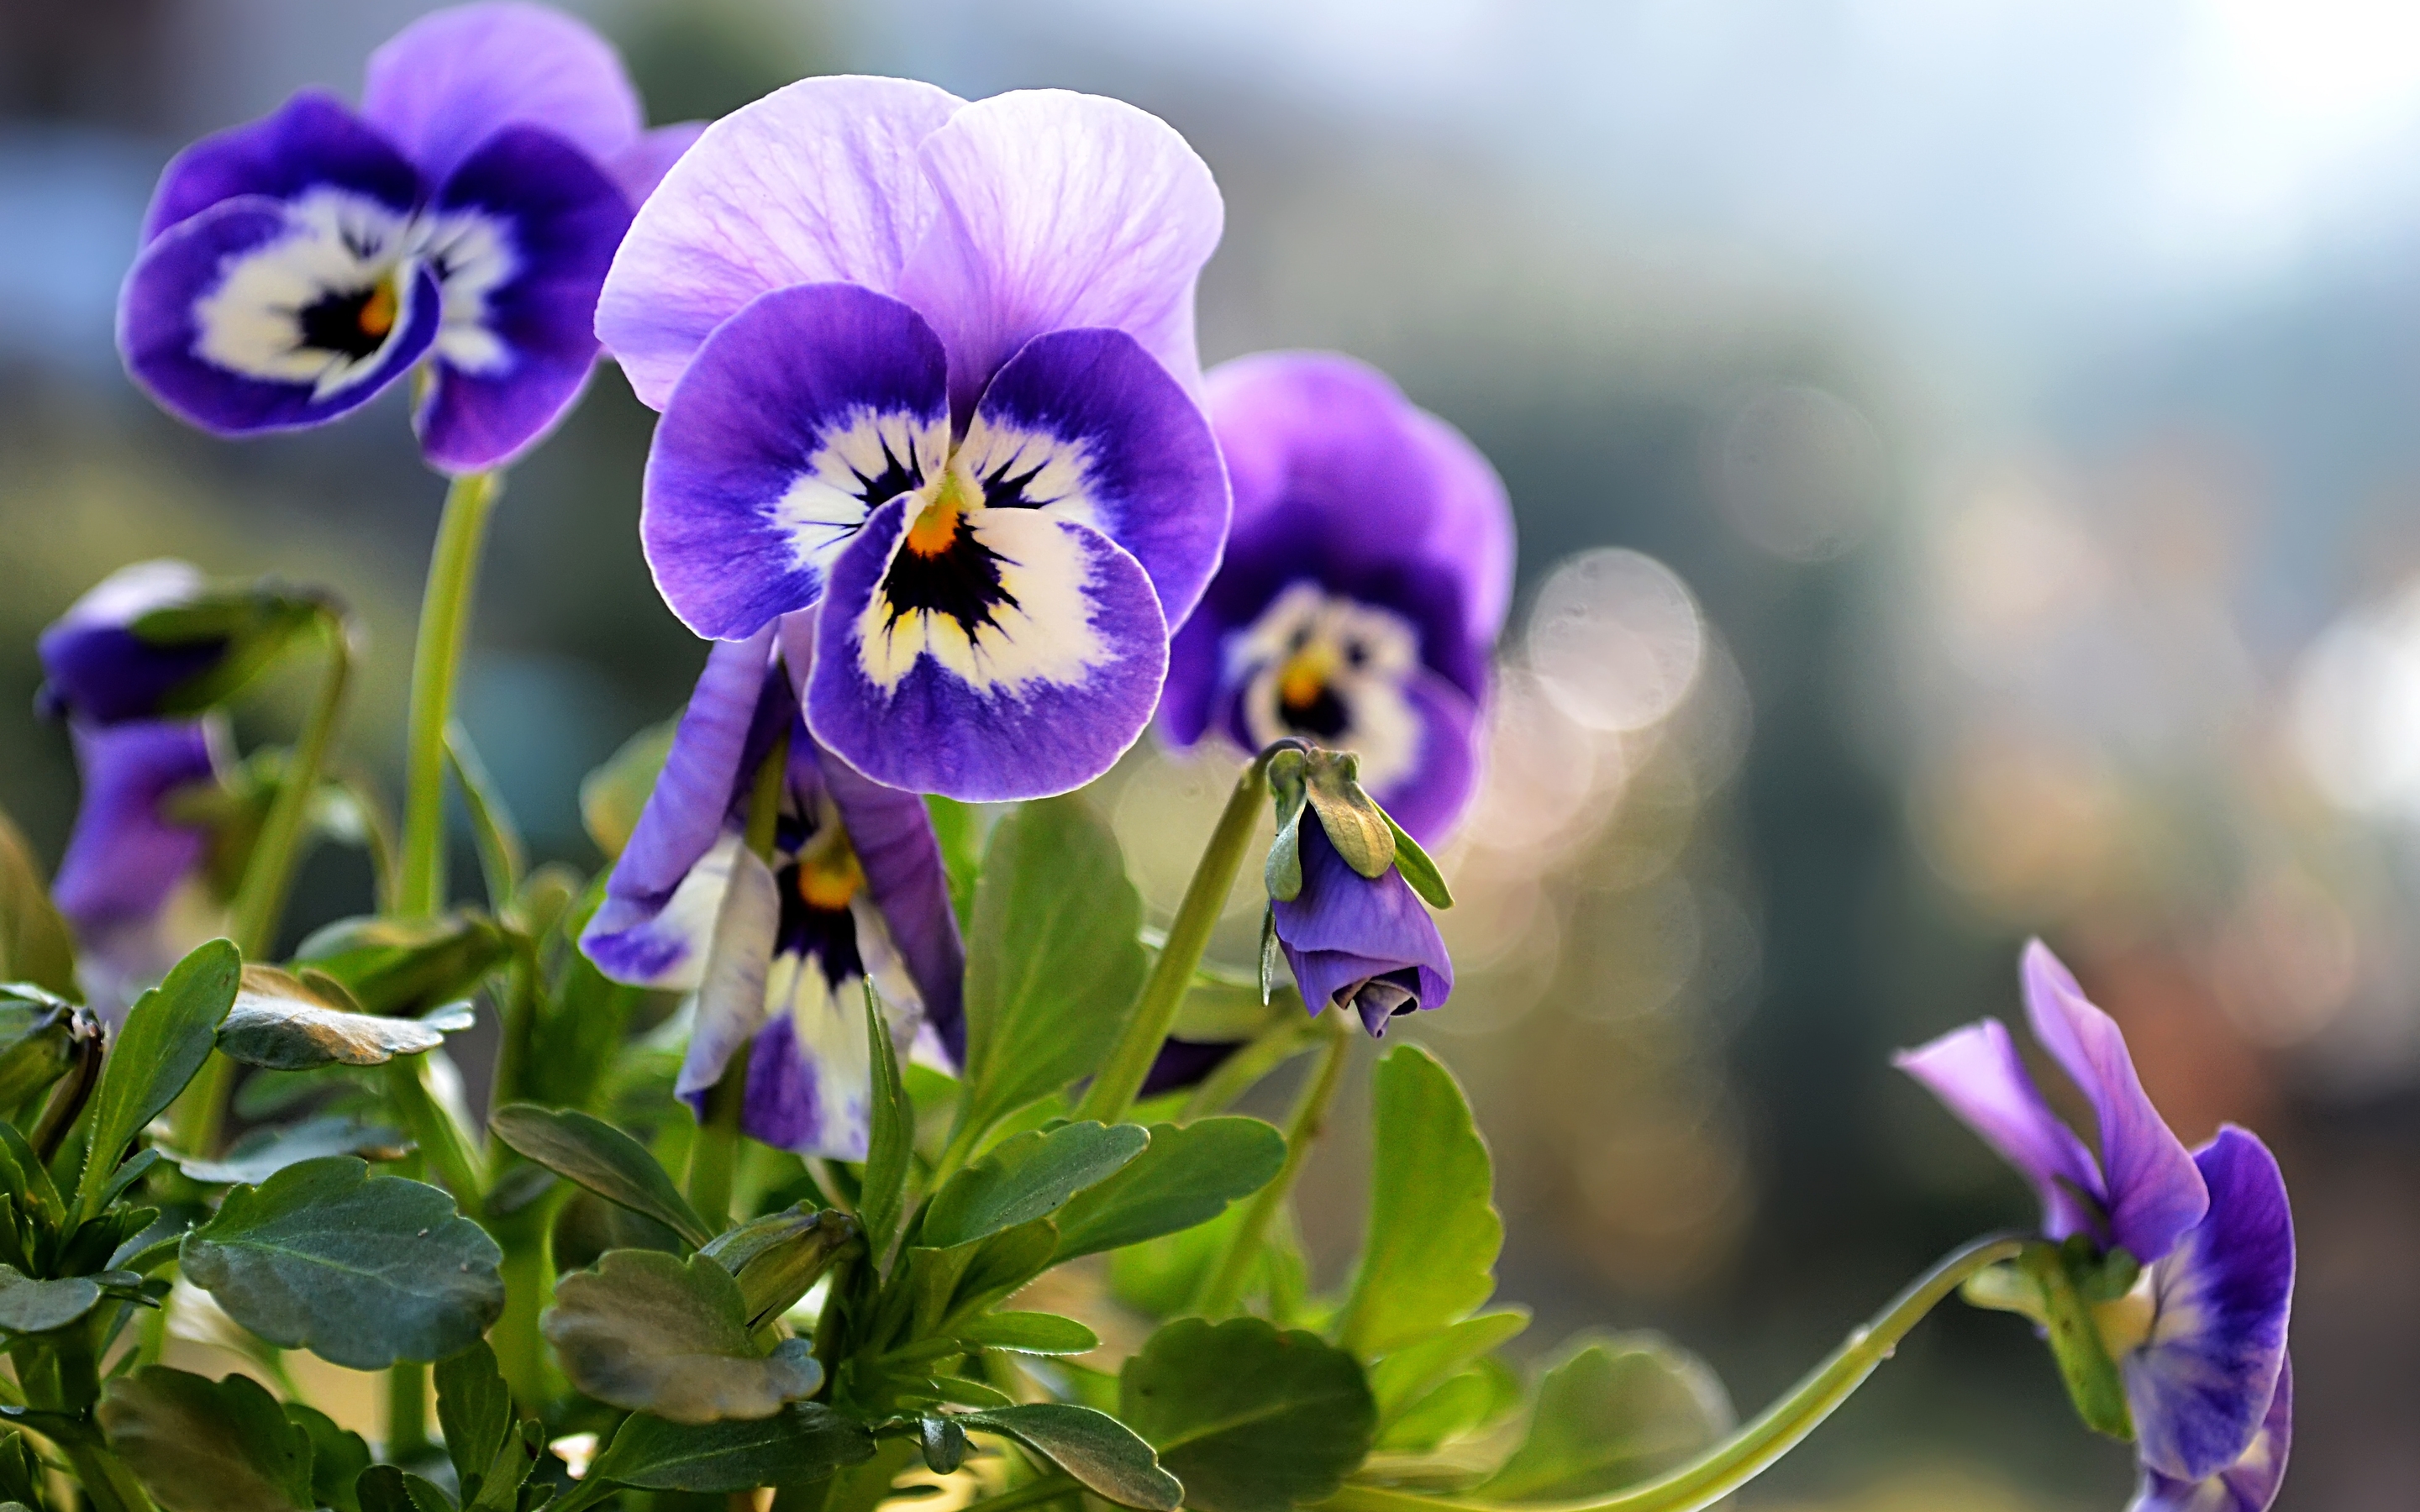 Beautiful Little Pansies for 2880 x 1800 Retina Display resolution